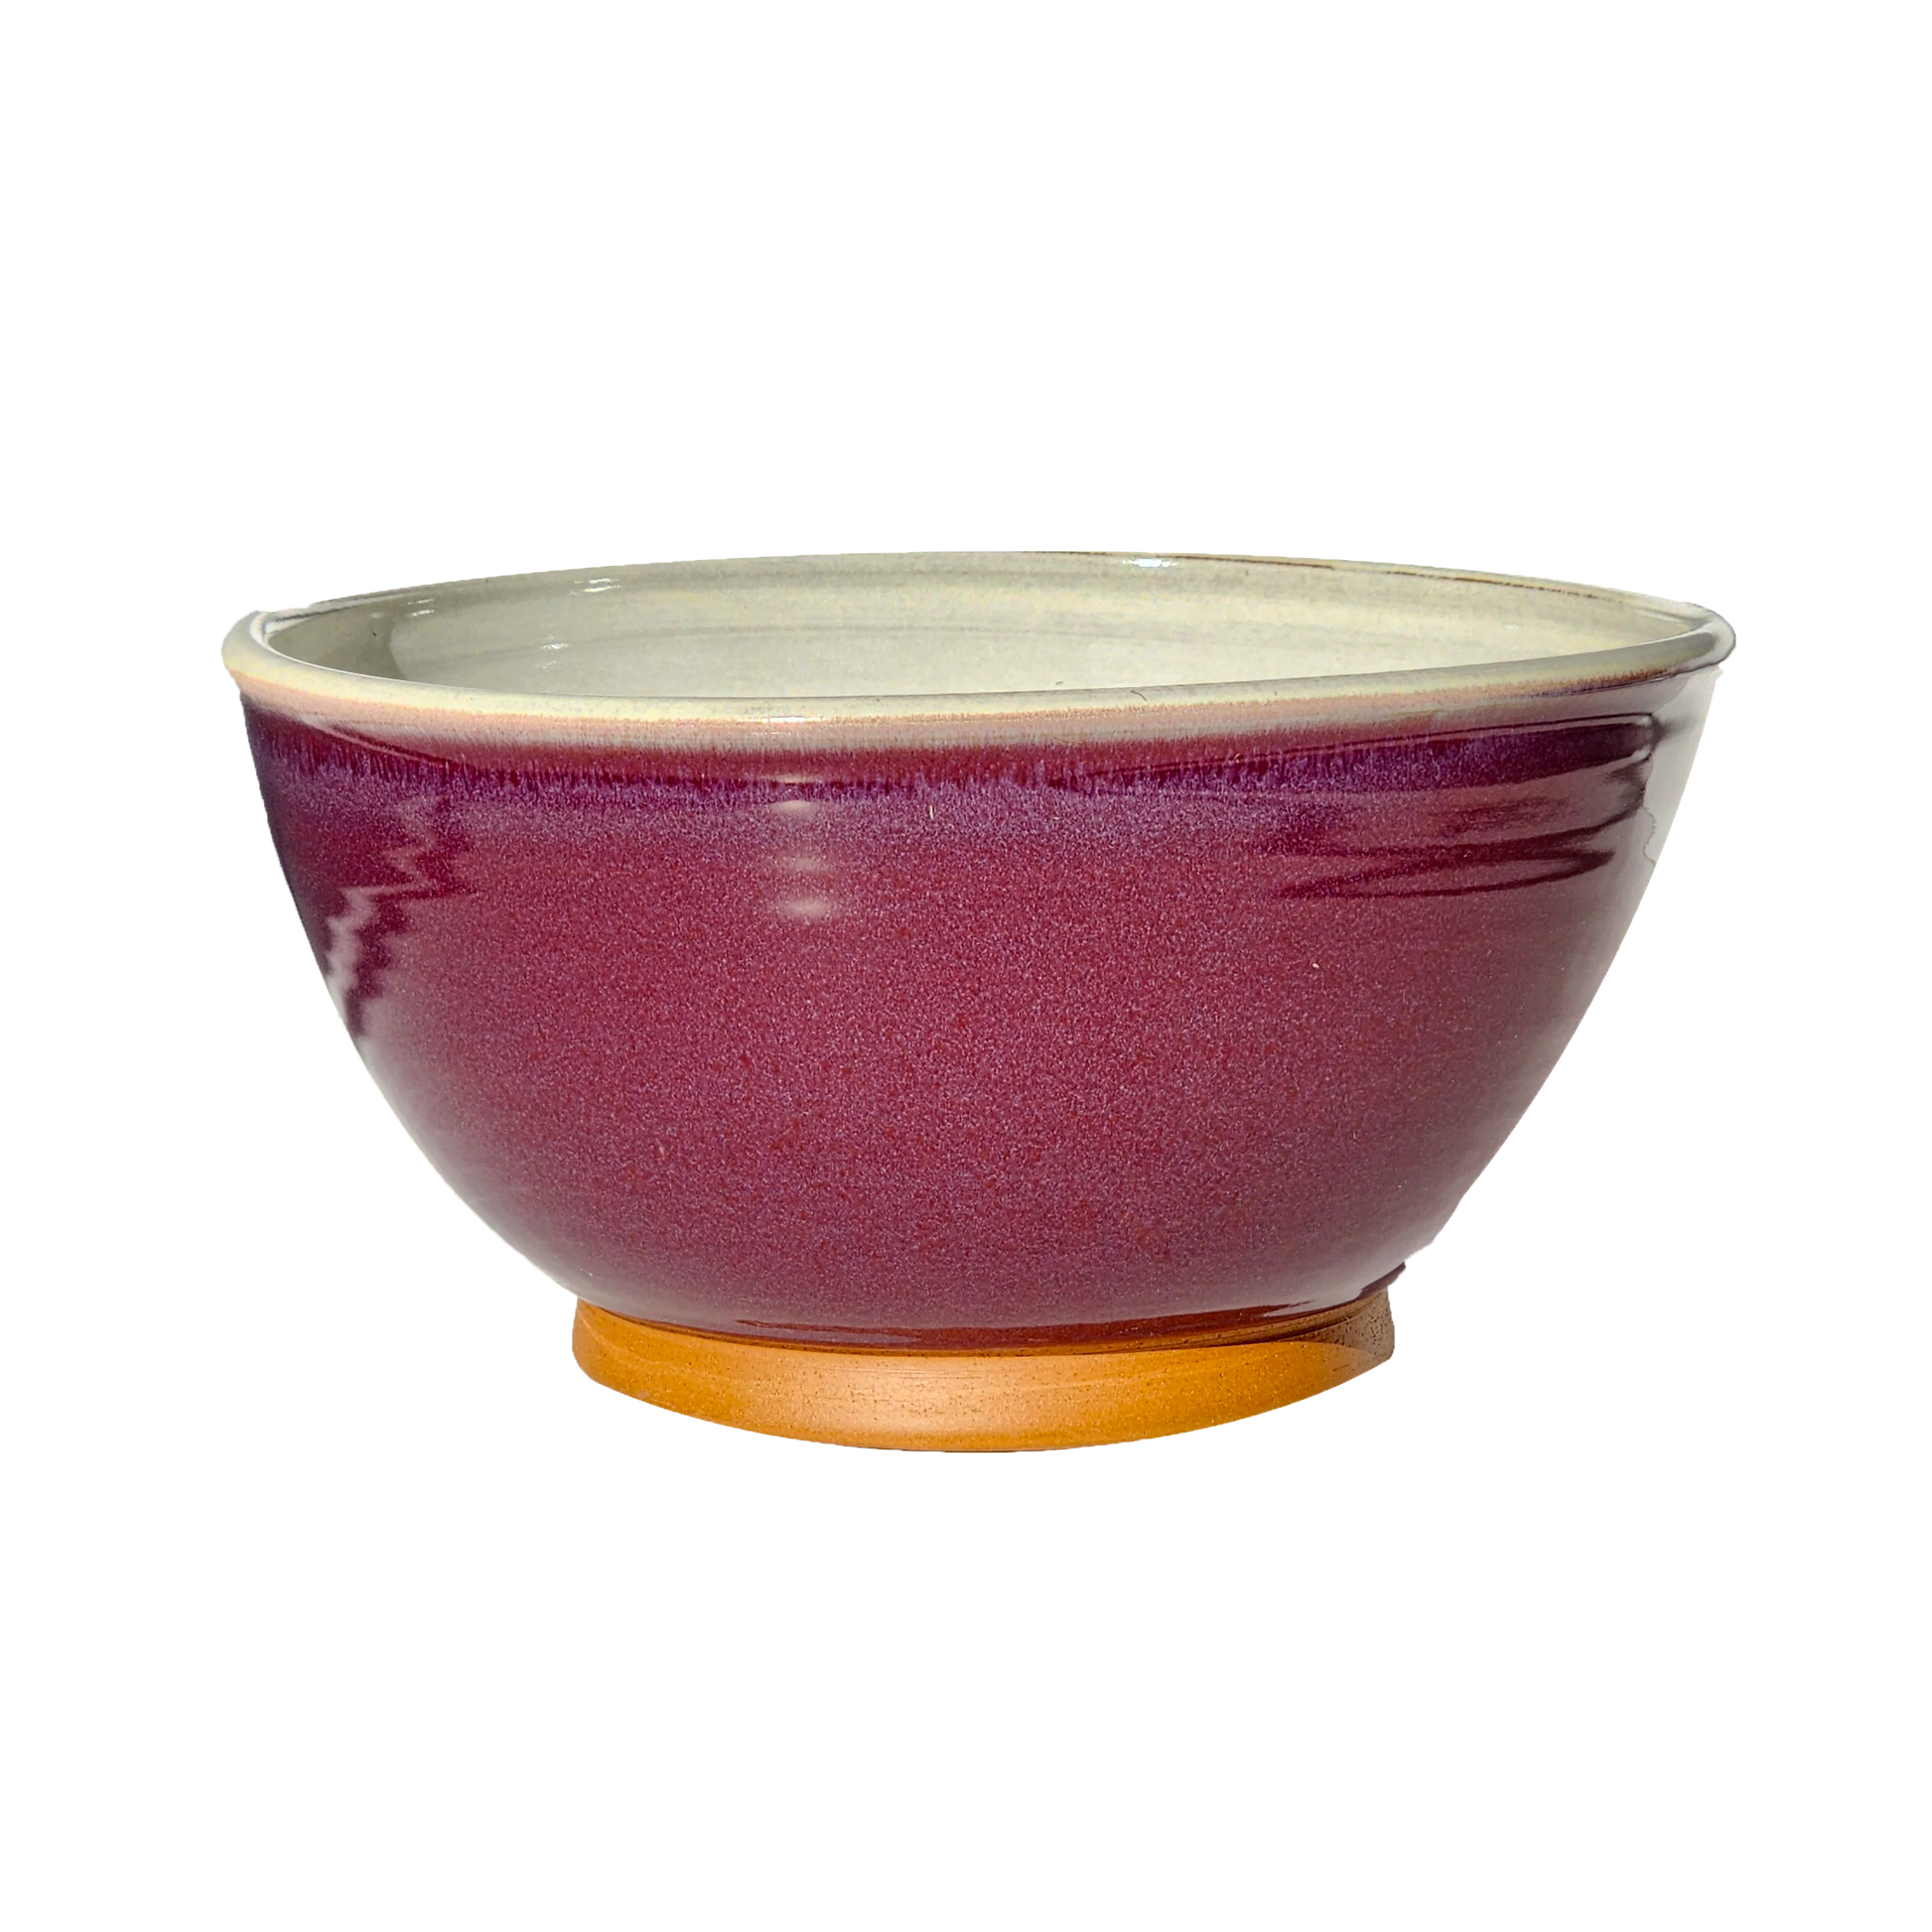 A large mixing bowl in vibrant red, featuring a spacious design with a capacity of 12.5 cups. Infuse your kitchen with energy and warmth with this bold hue.